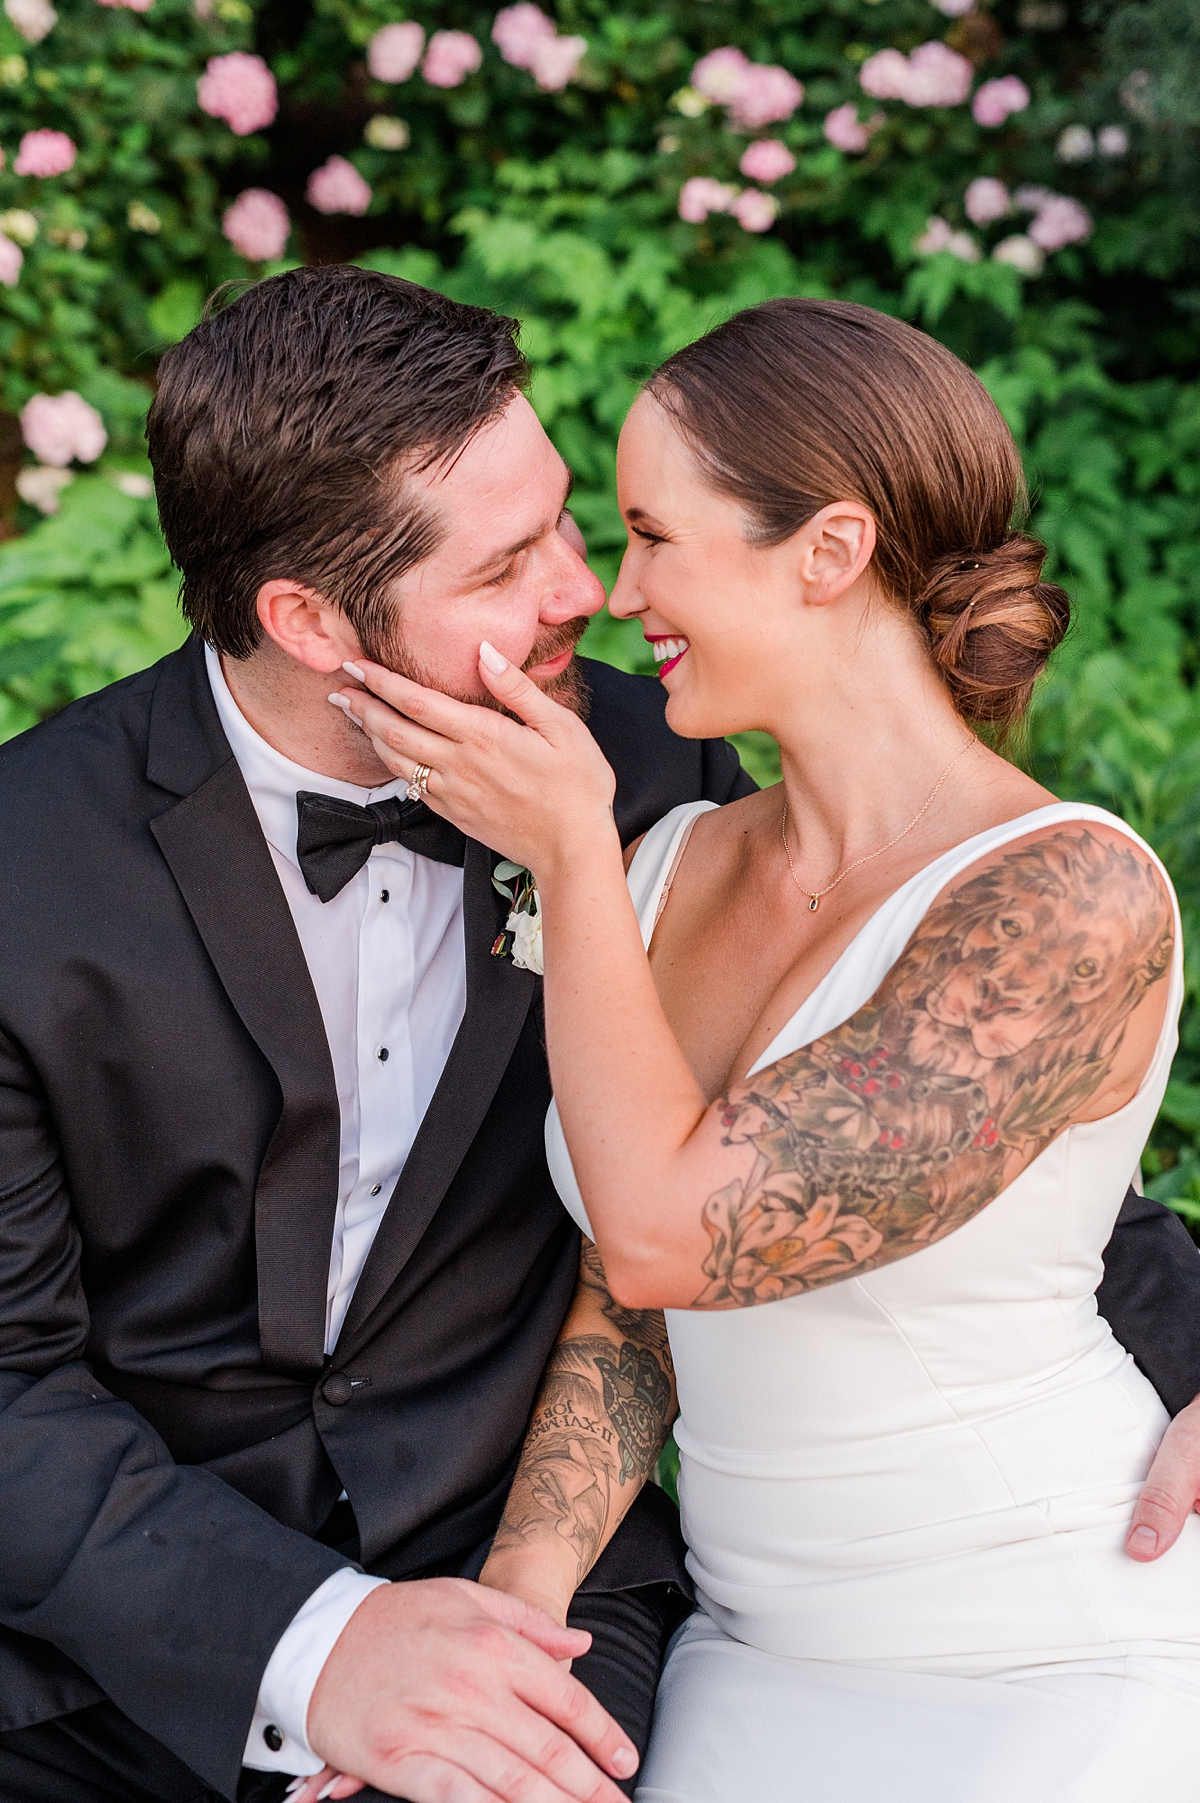 Bride and Groom Portraits at Spring Lewis Ginter Botanical Garden Wedding. Wedding Photography by Richmond Wedding Photographer Kailey Brianne Photography. 